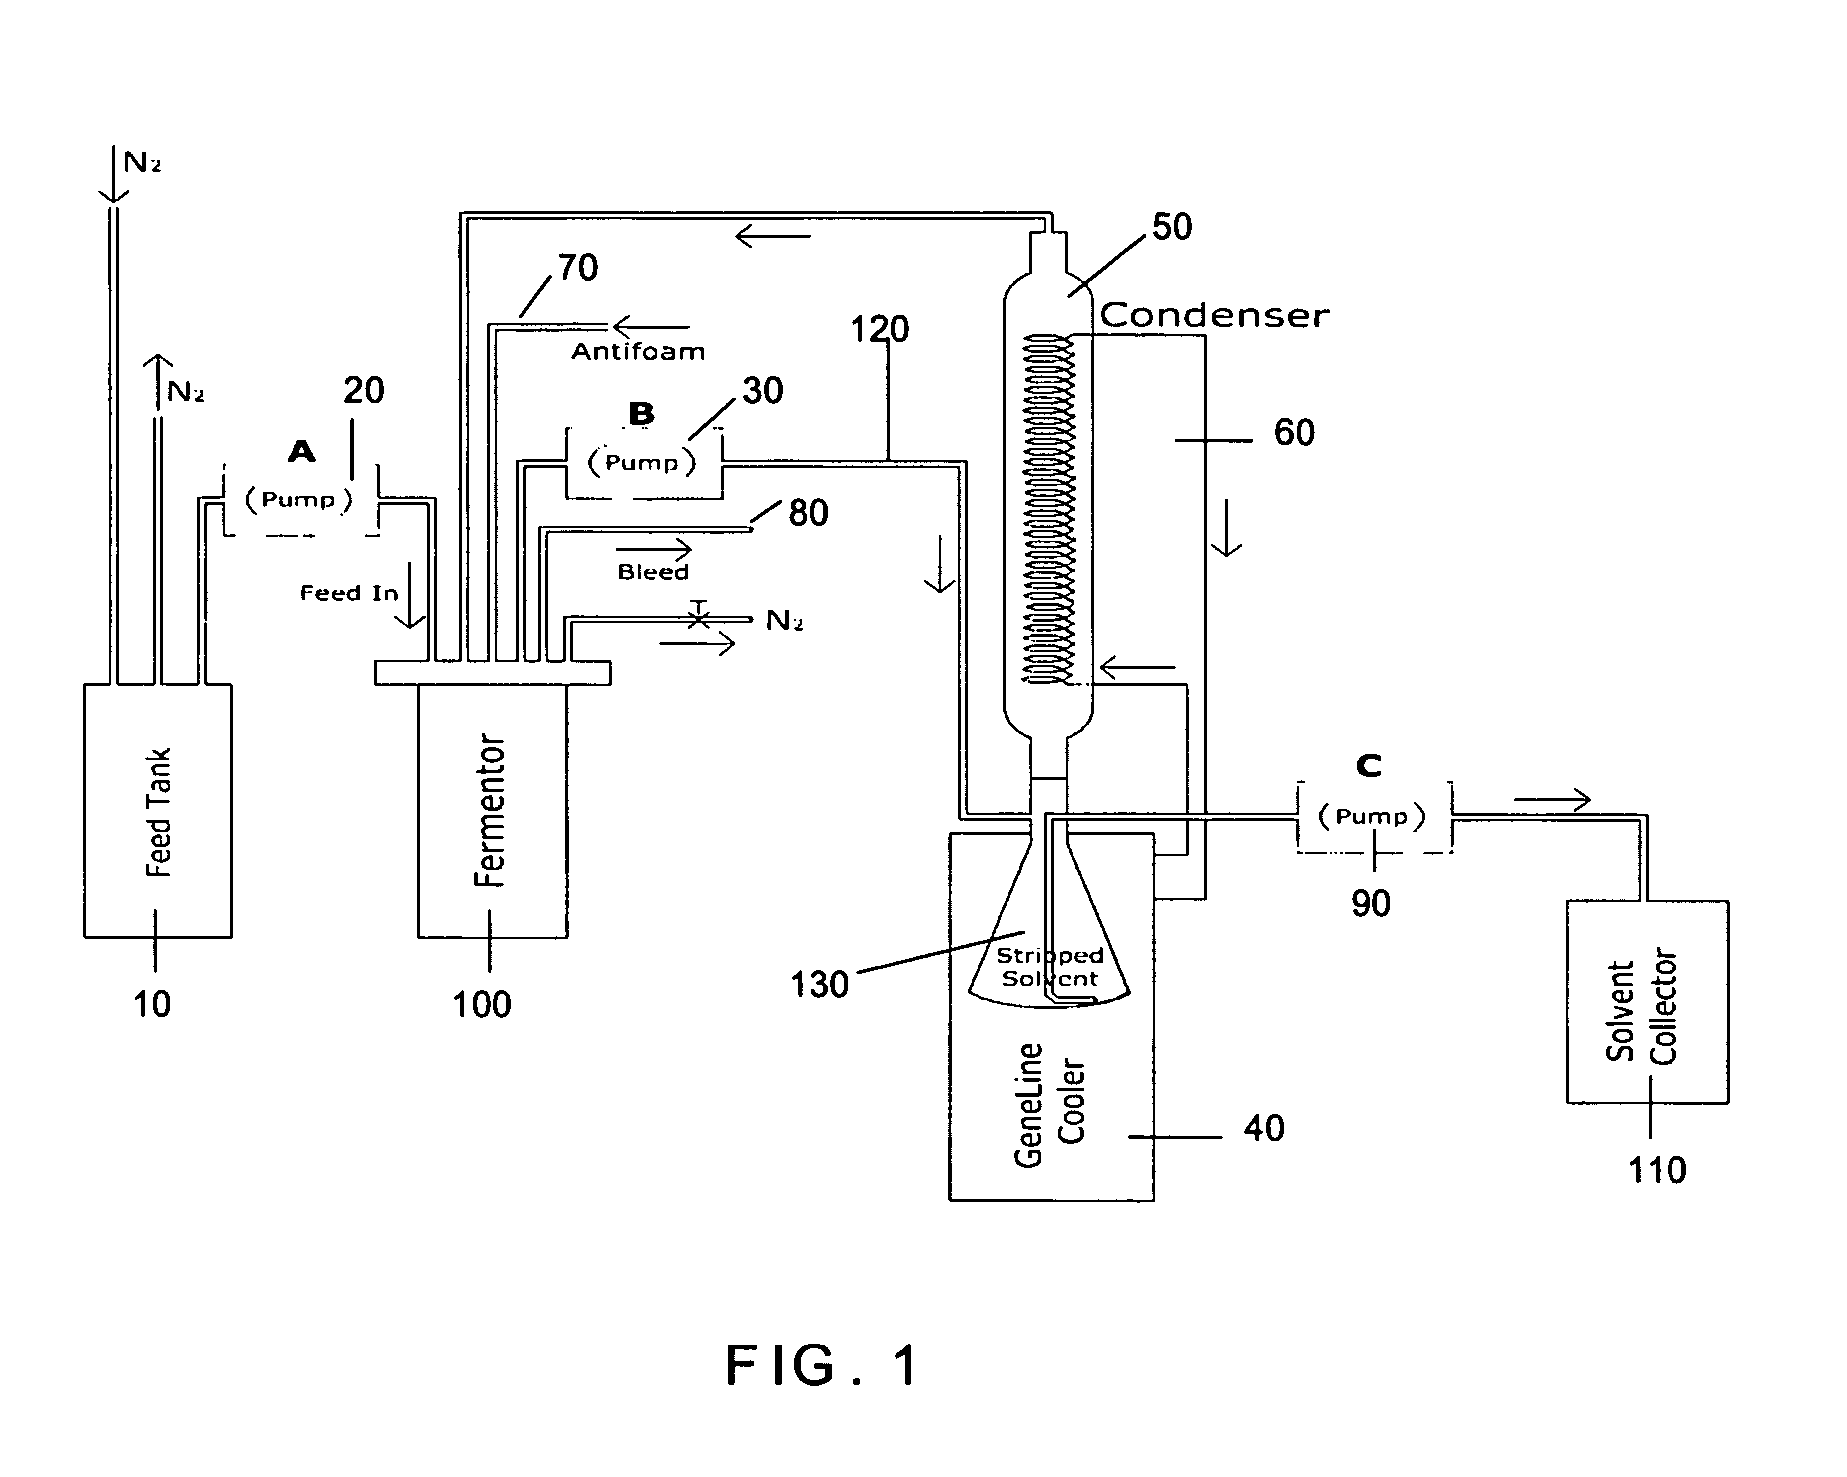 Process for continuous solvent production